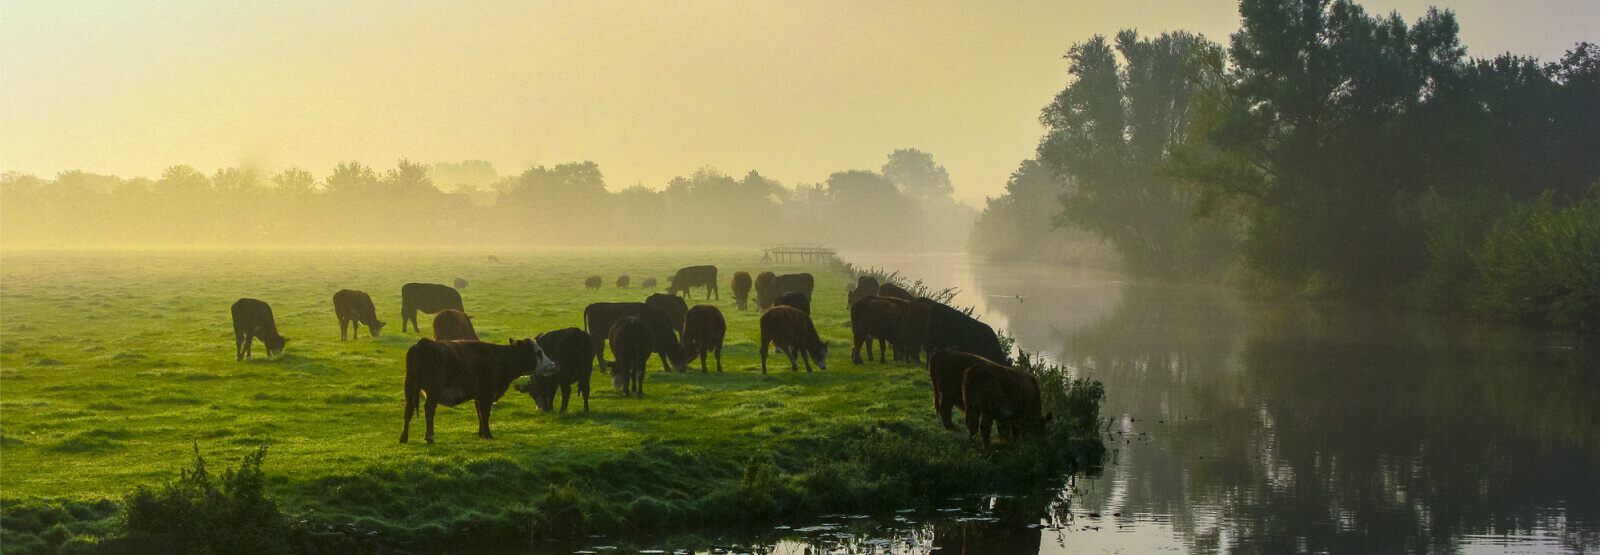 A herd of cattle in a field next to a small body of water